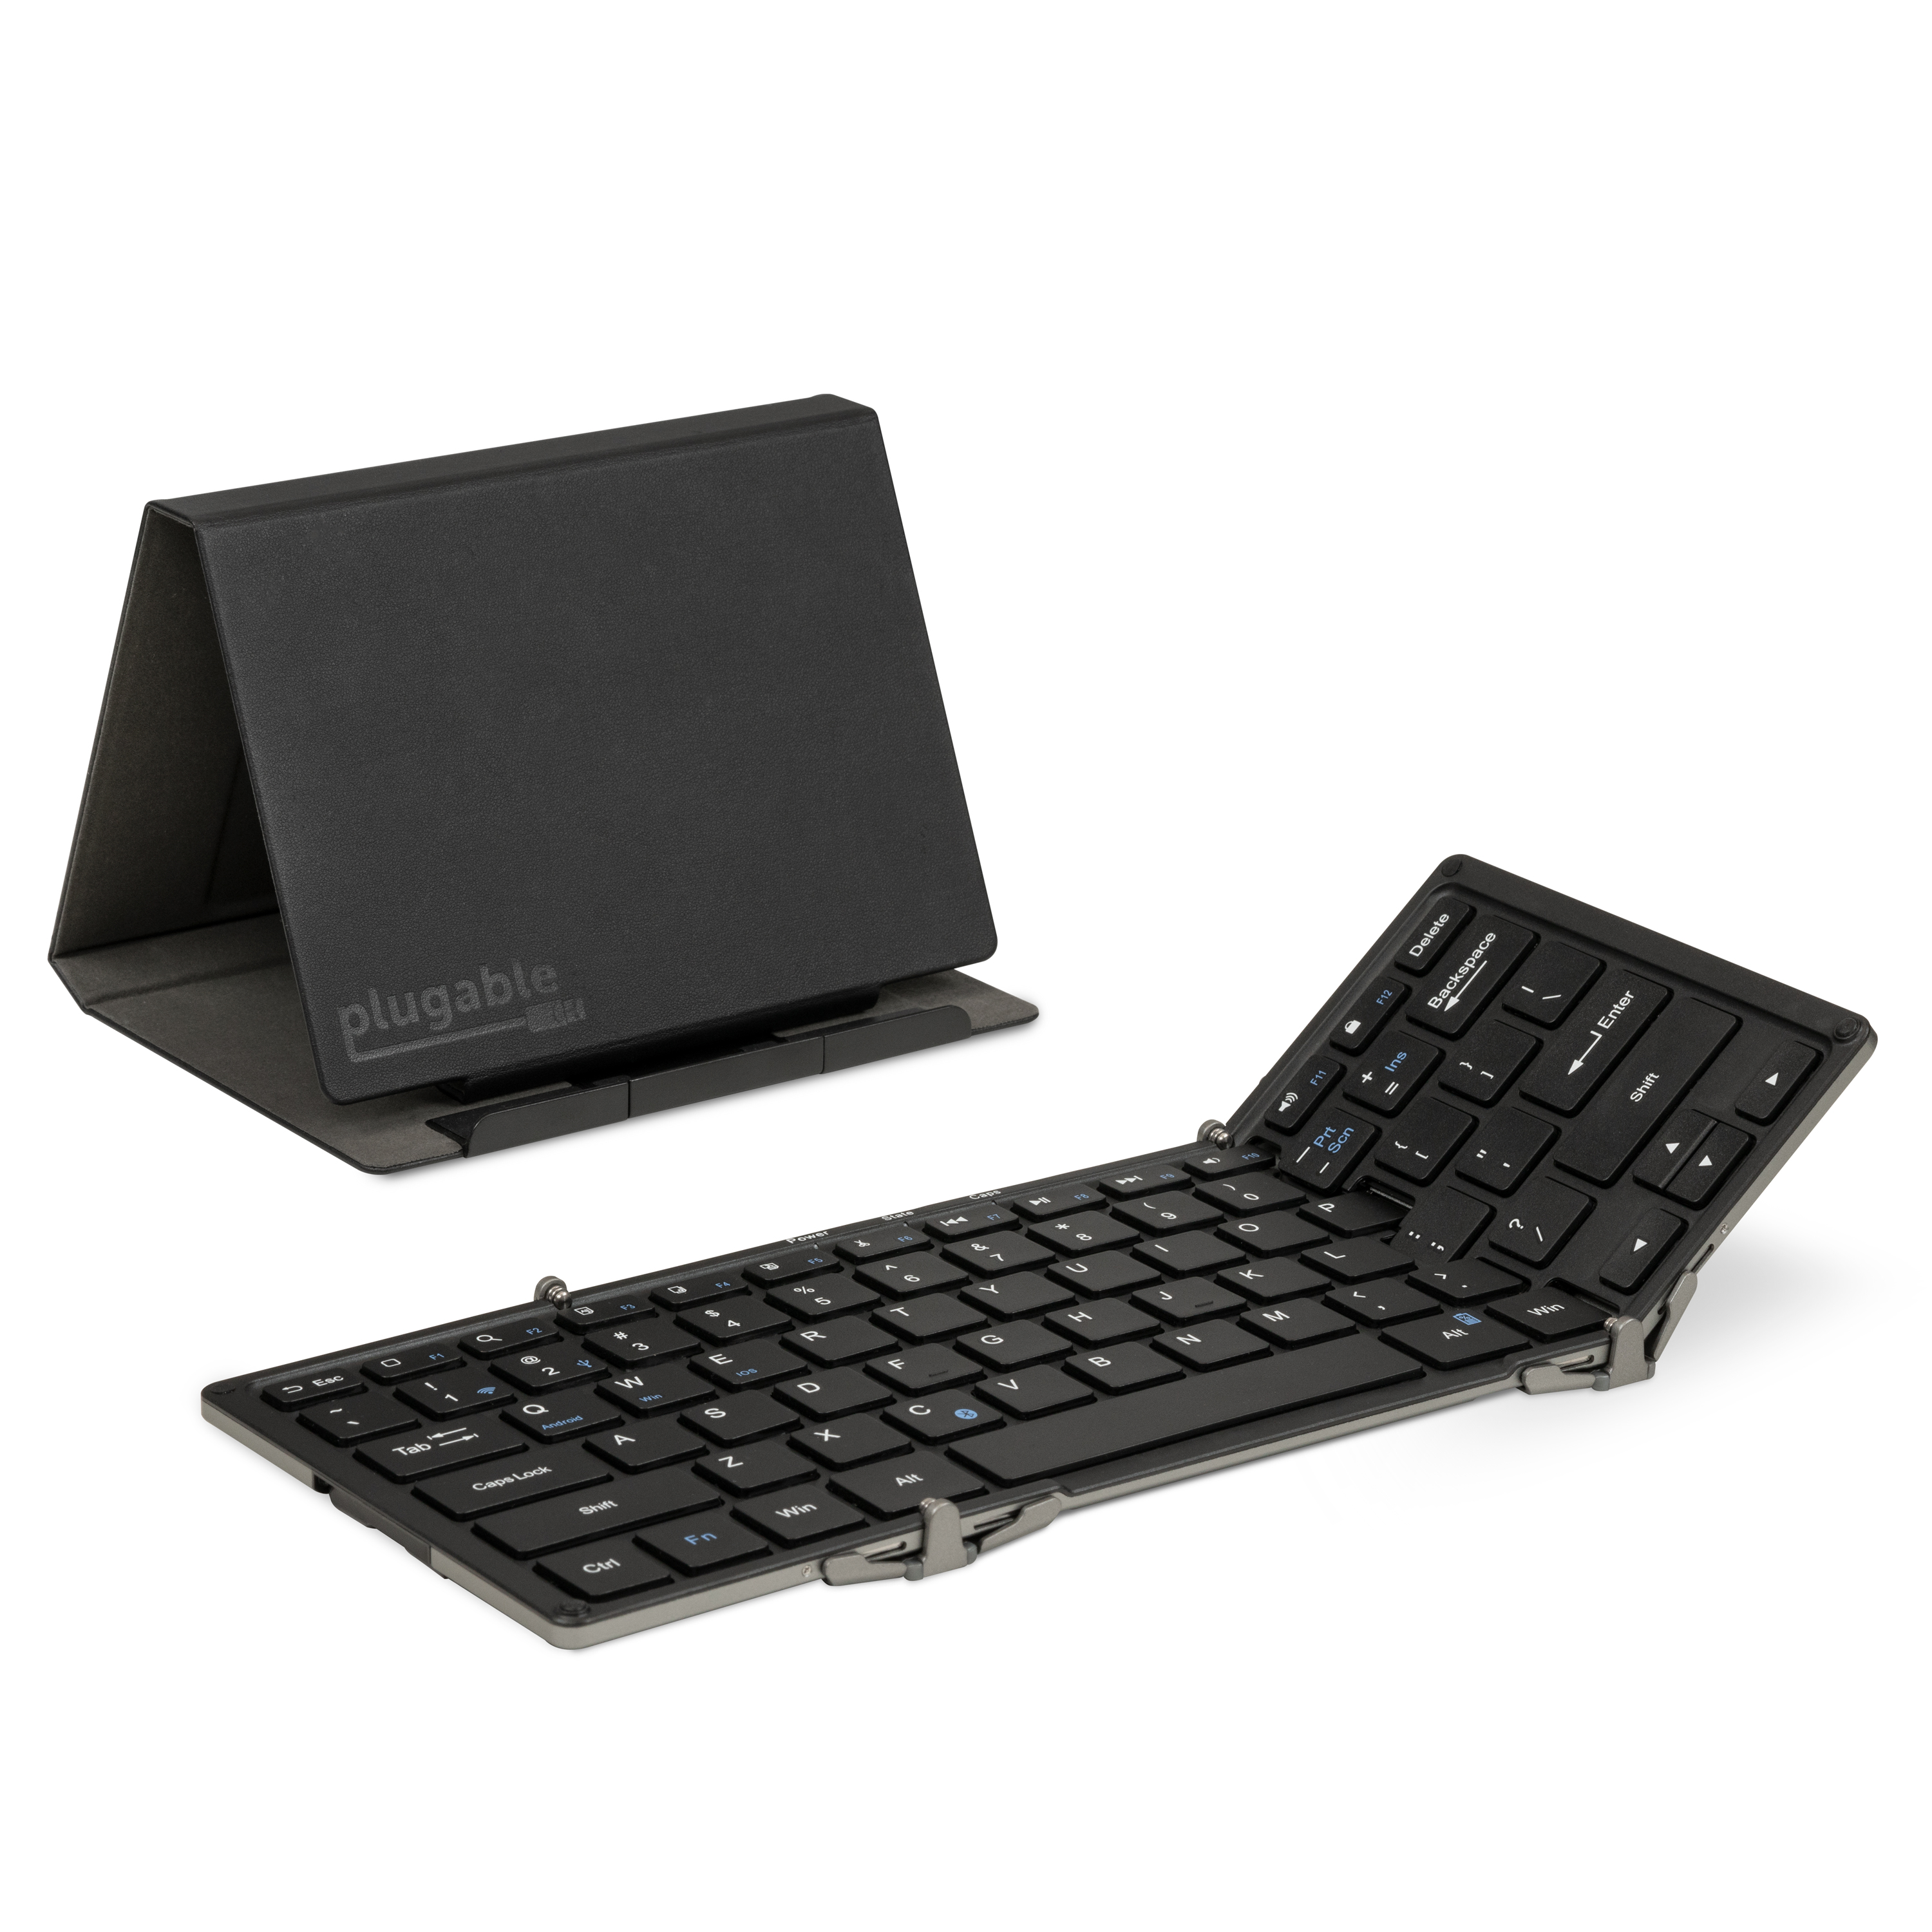 Plugable Foldable Bluetooth Keyboard Compatible with iPad, iPhones, Android, and Windows, Full-Size Multi-Device Keyboard, Wireless and Portable with Included Stand for iPad/iPhone (11.5 inches) - image 1 of 8